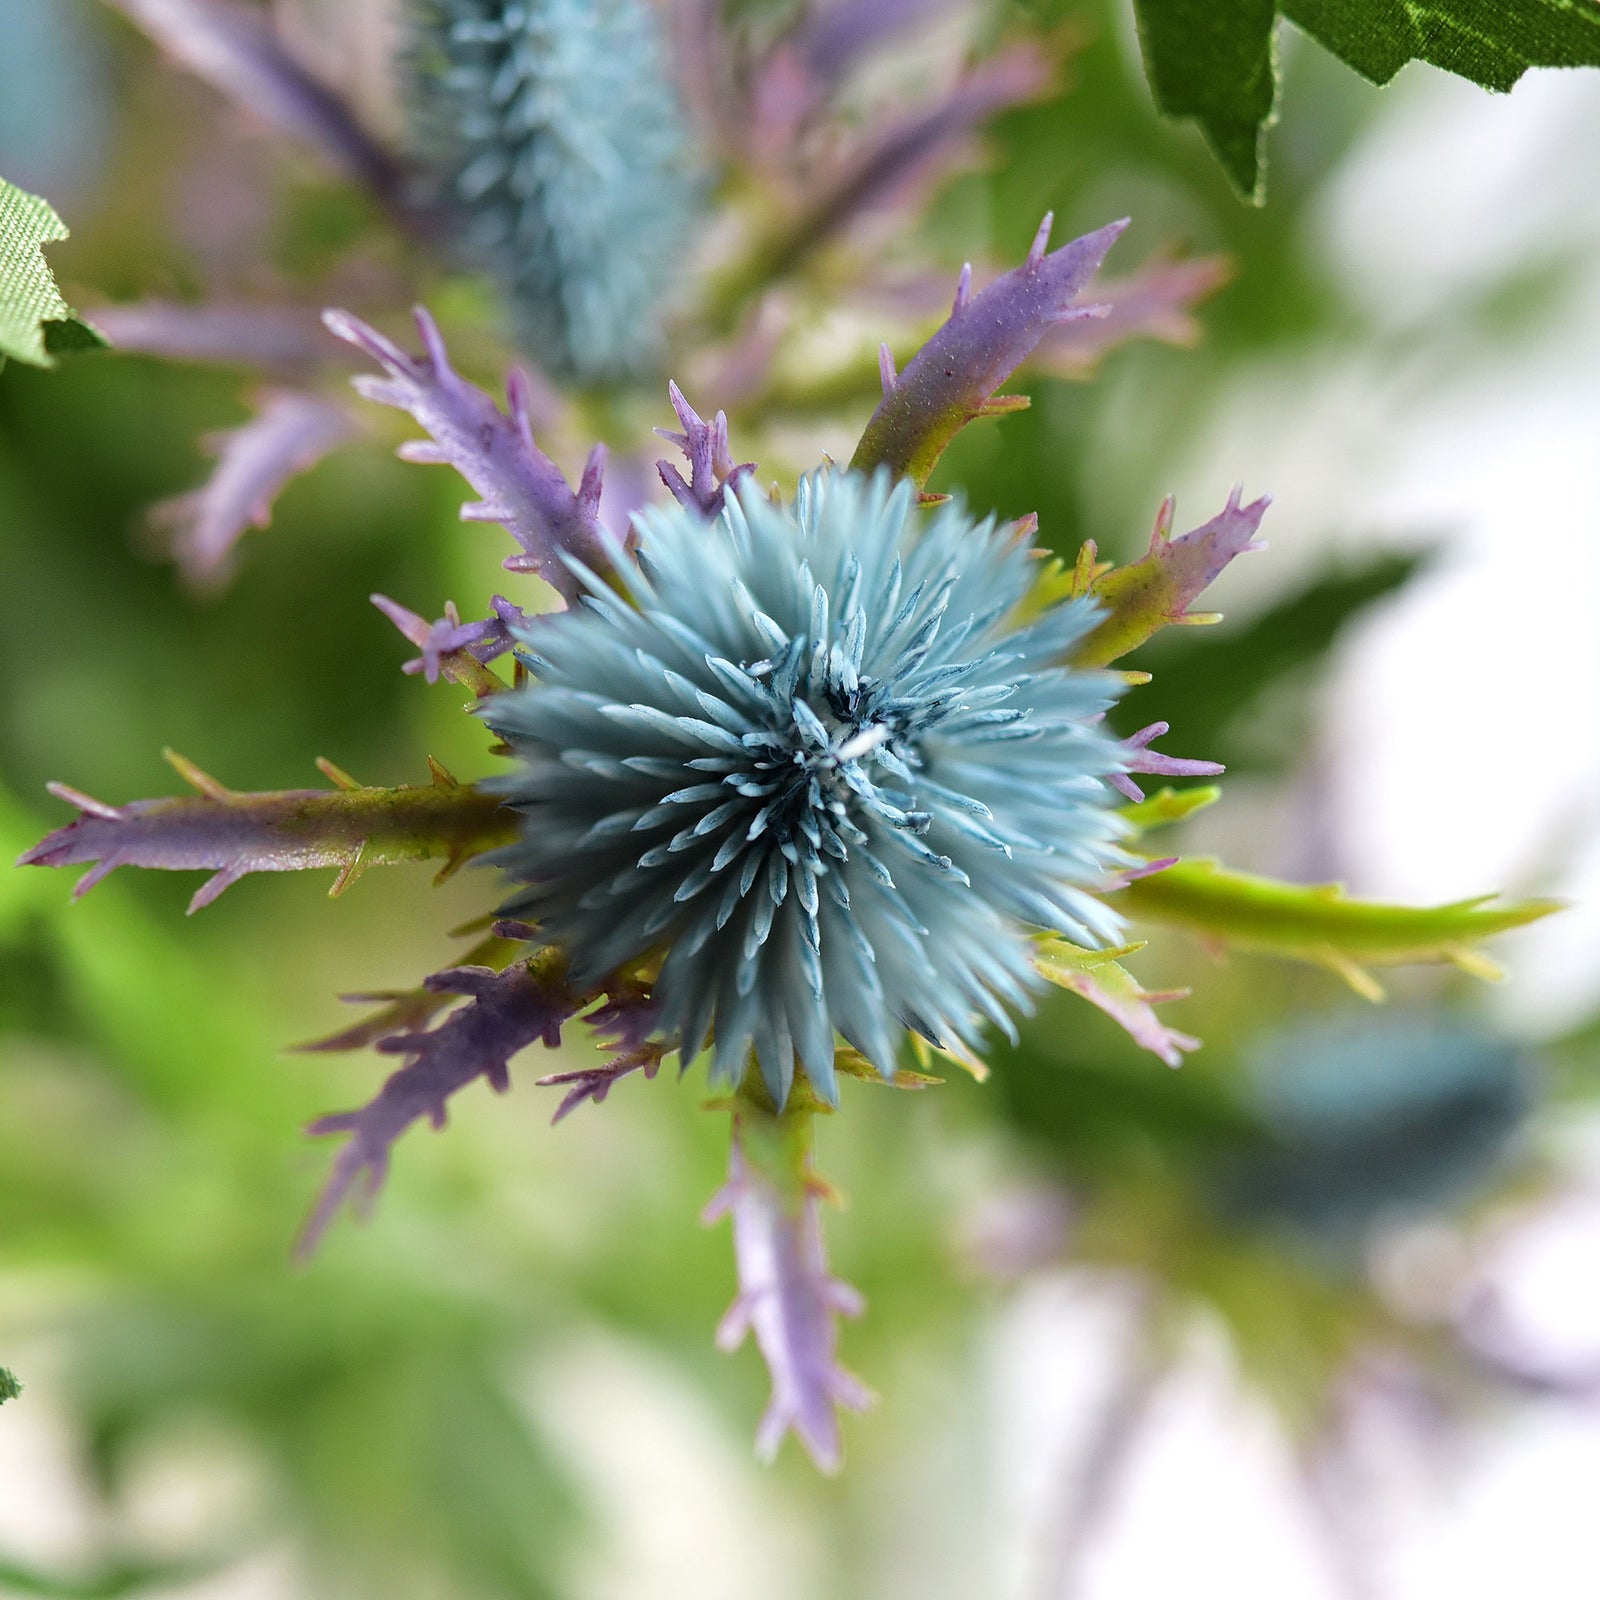 Real Life Size Artificial Real Touch Eryngium (Sea Holly) Northern Lights Blue Thistles (5 Stems)